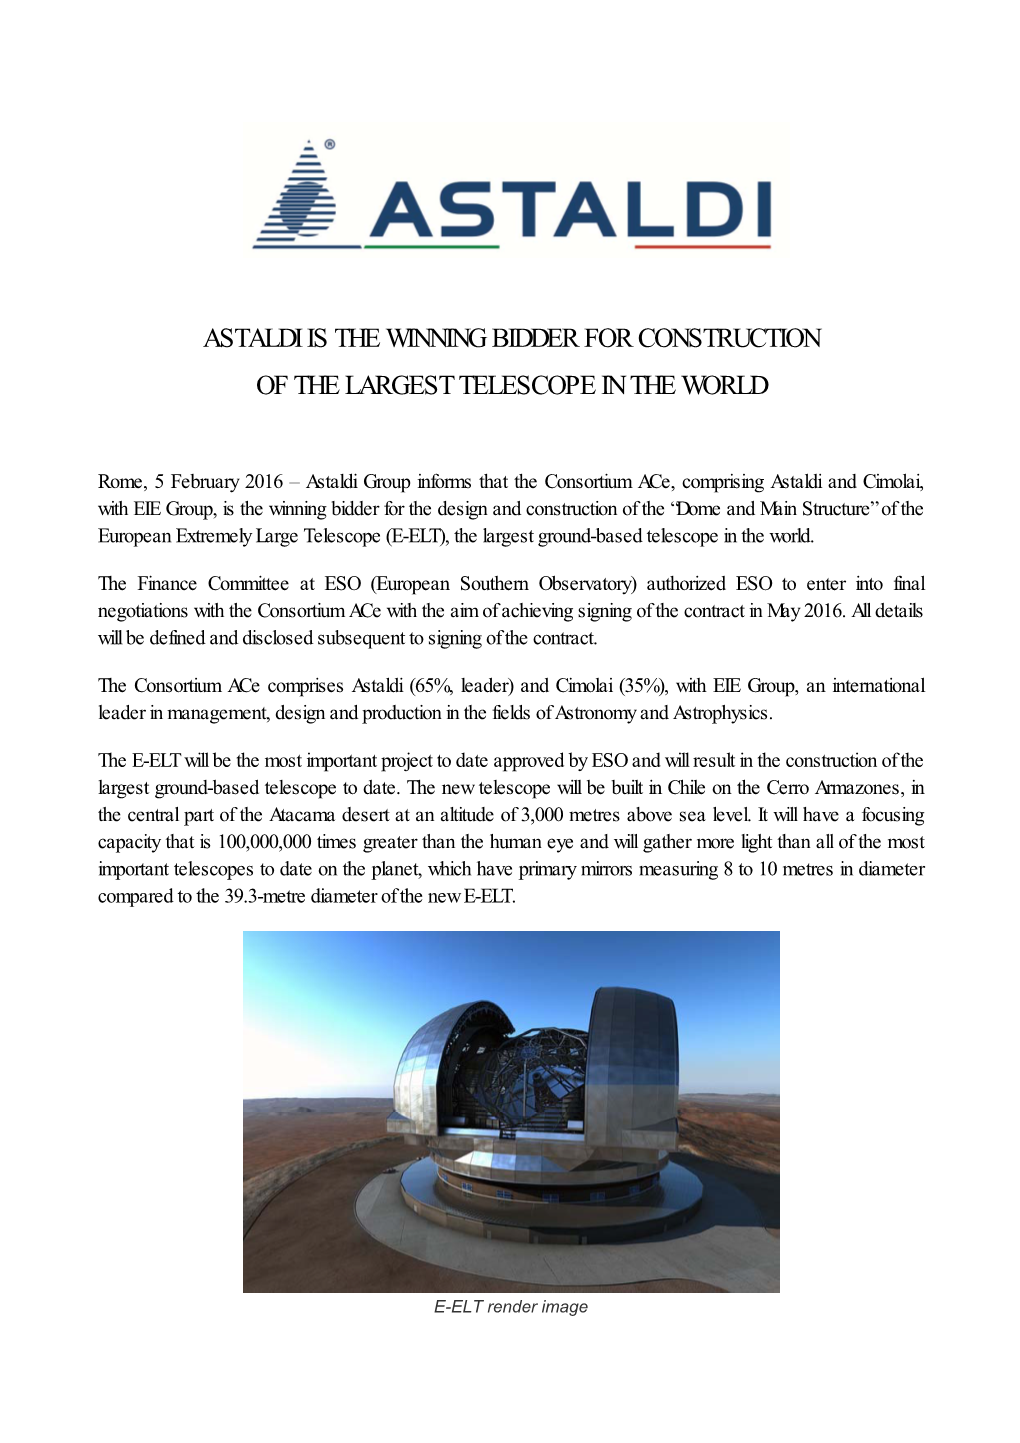 Astaldi Is the Winning Bidder for Construction of the Largest Telescope in the World